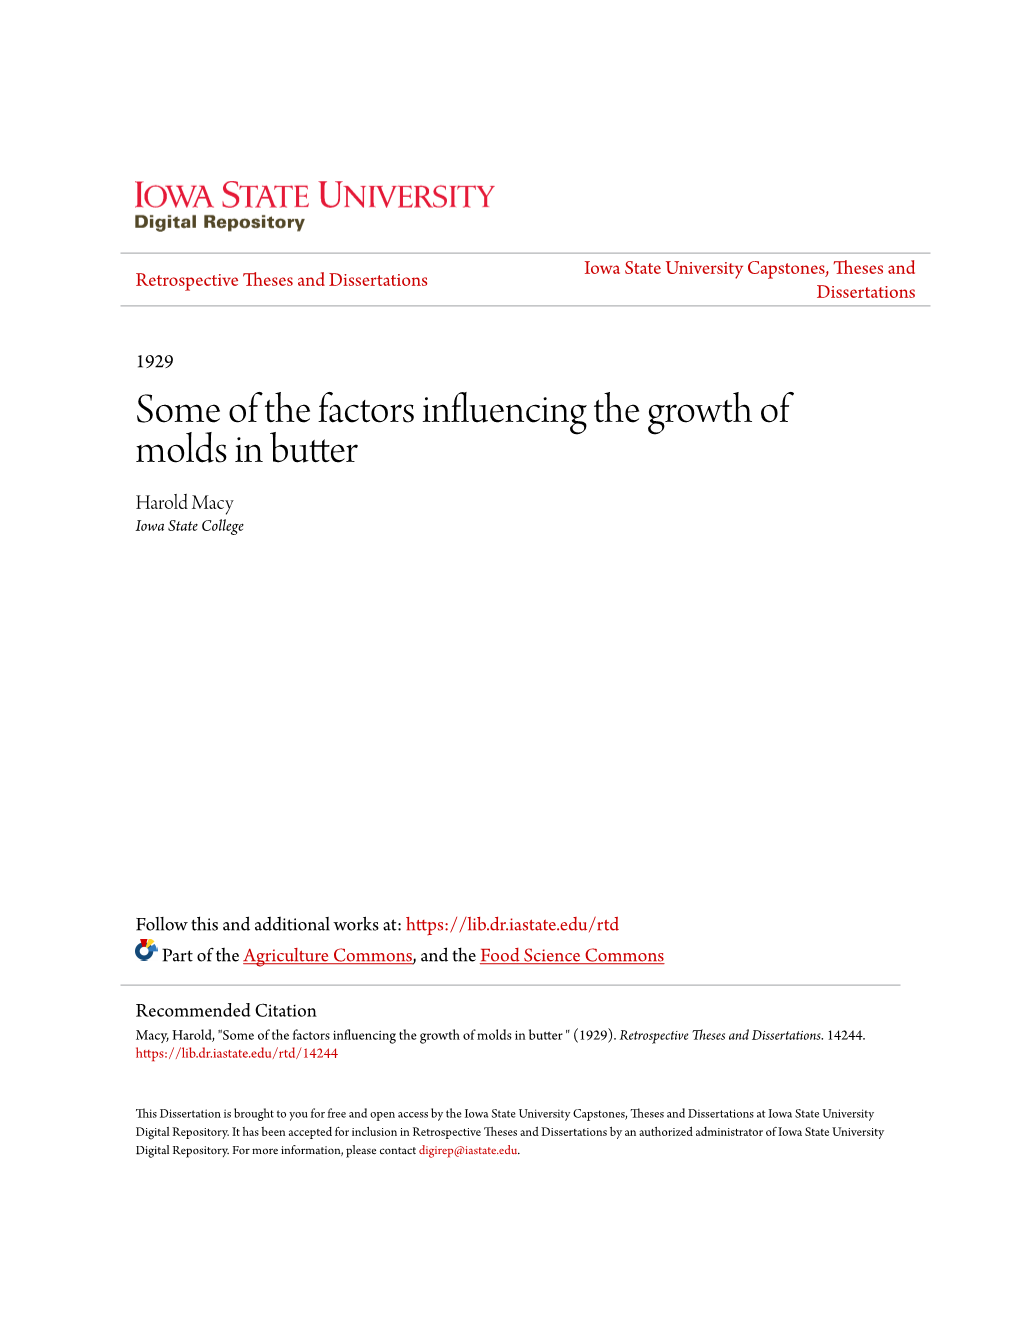 Some of the Factors Influencing the Growth of Molds in Butter Harold Macy Iowa State College